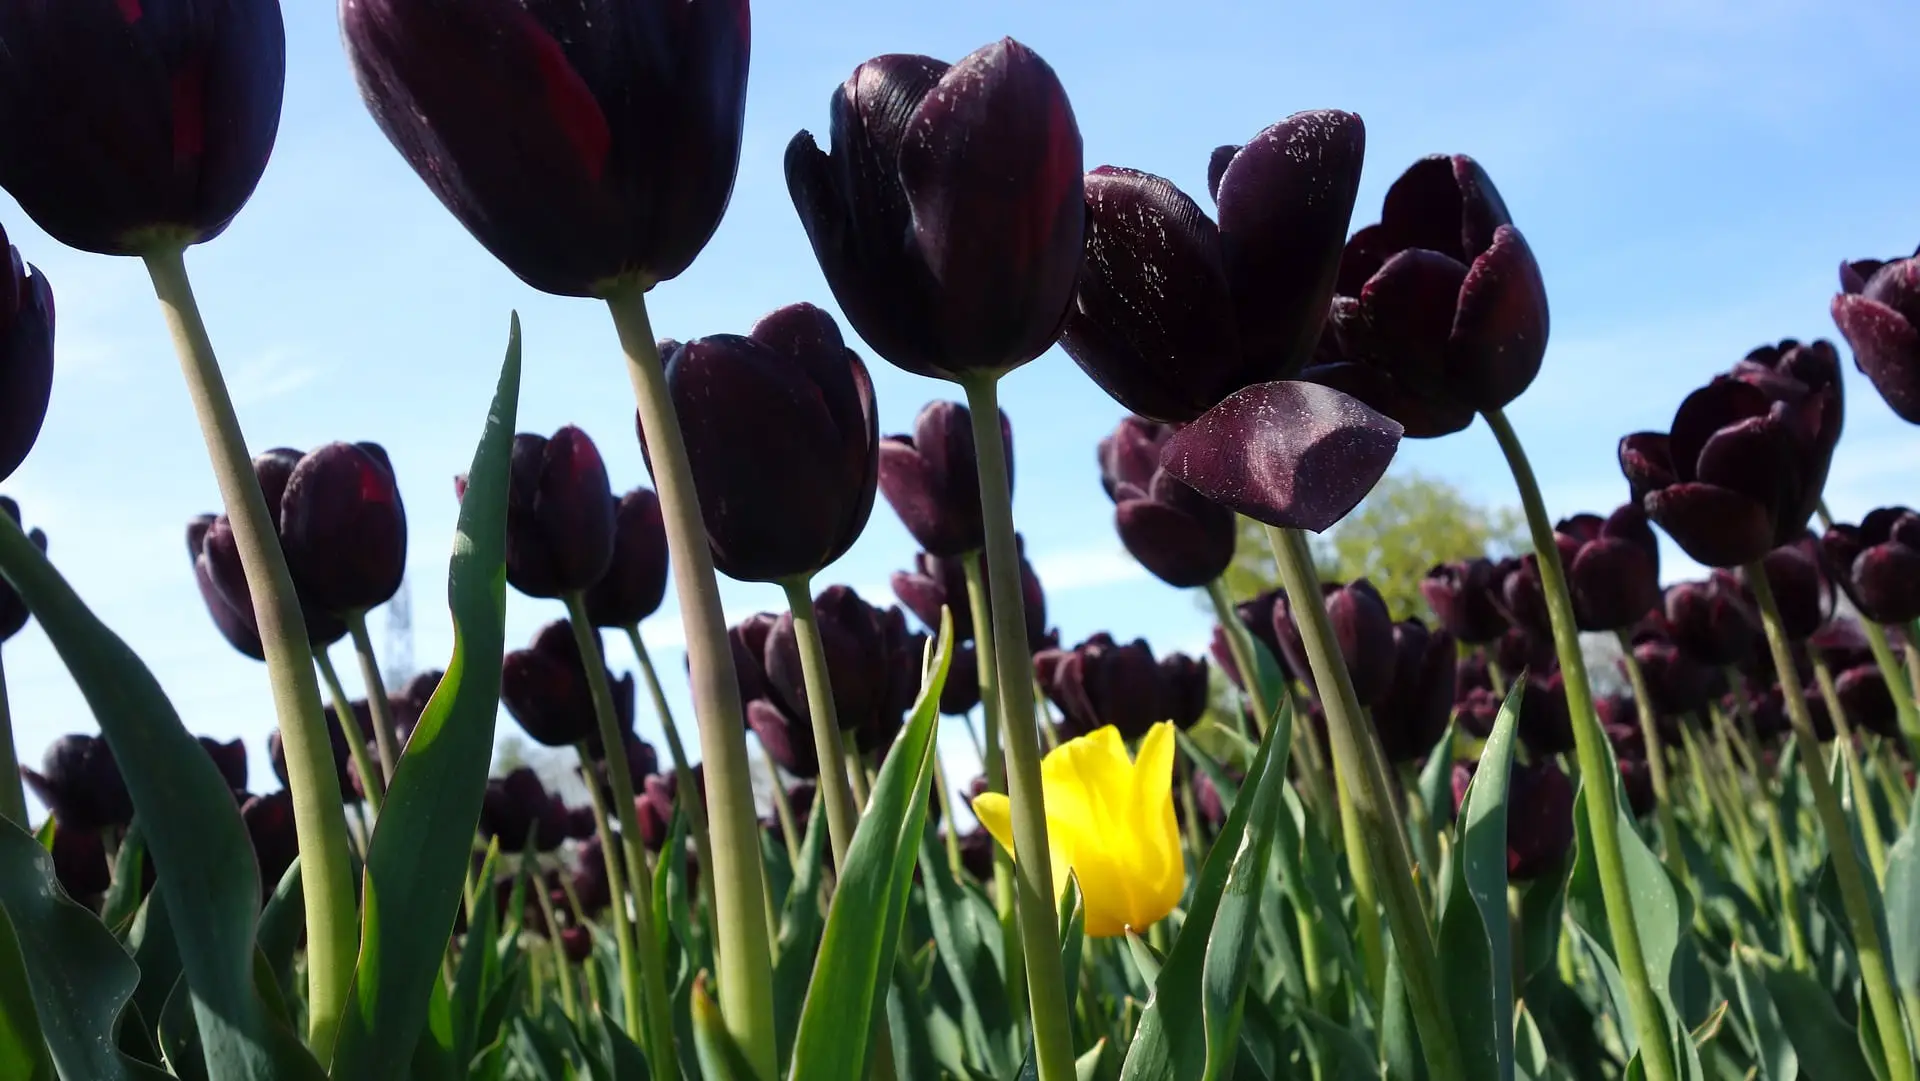 Black Tulips - Are They Really Black in Color? - Article onThursd